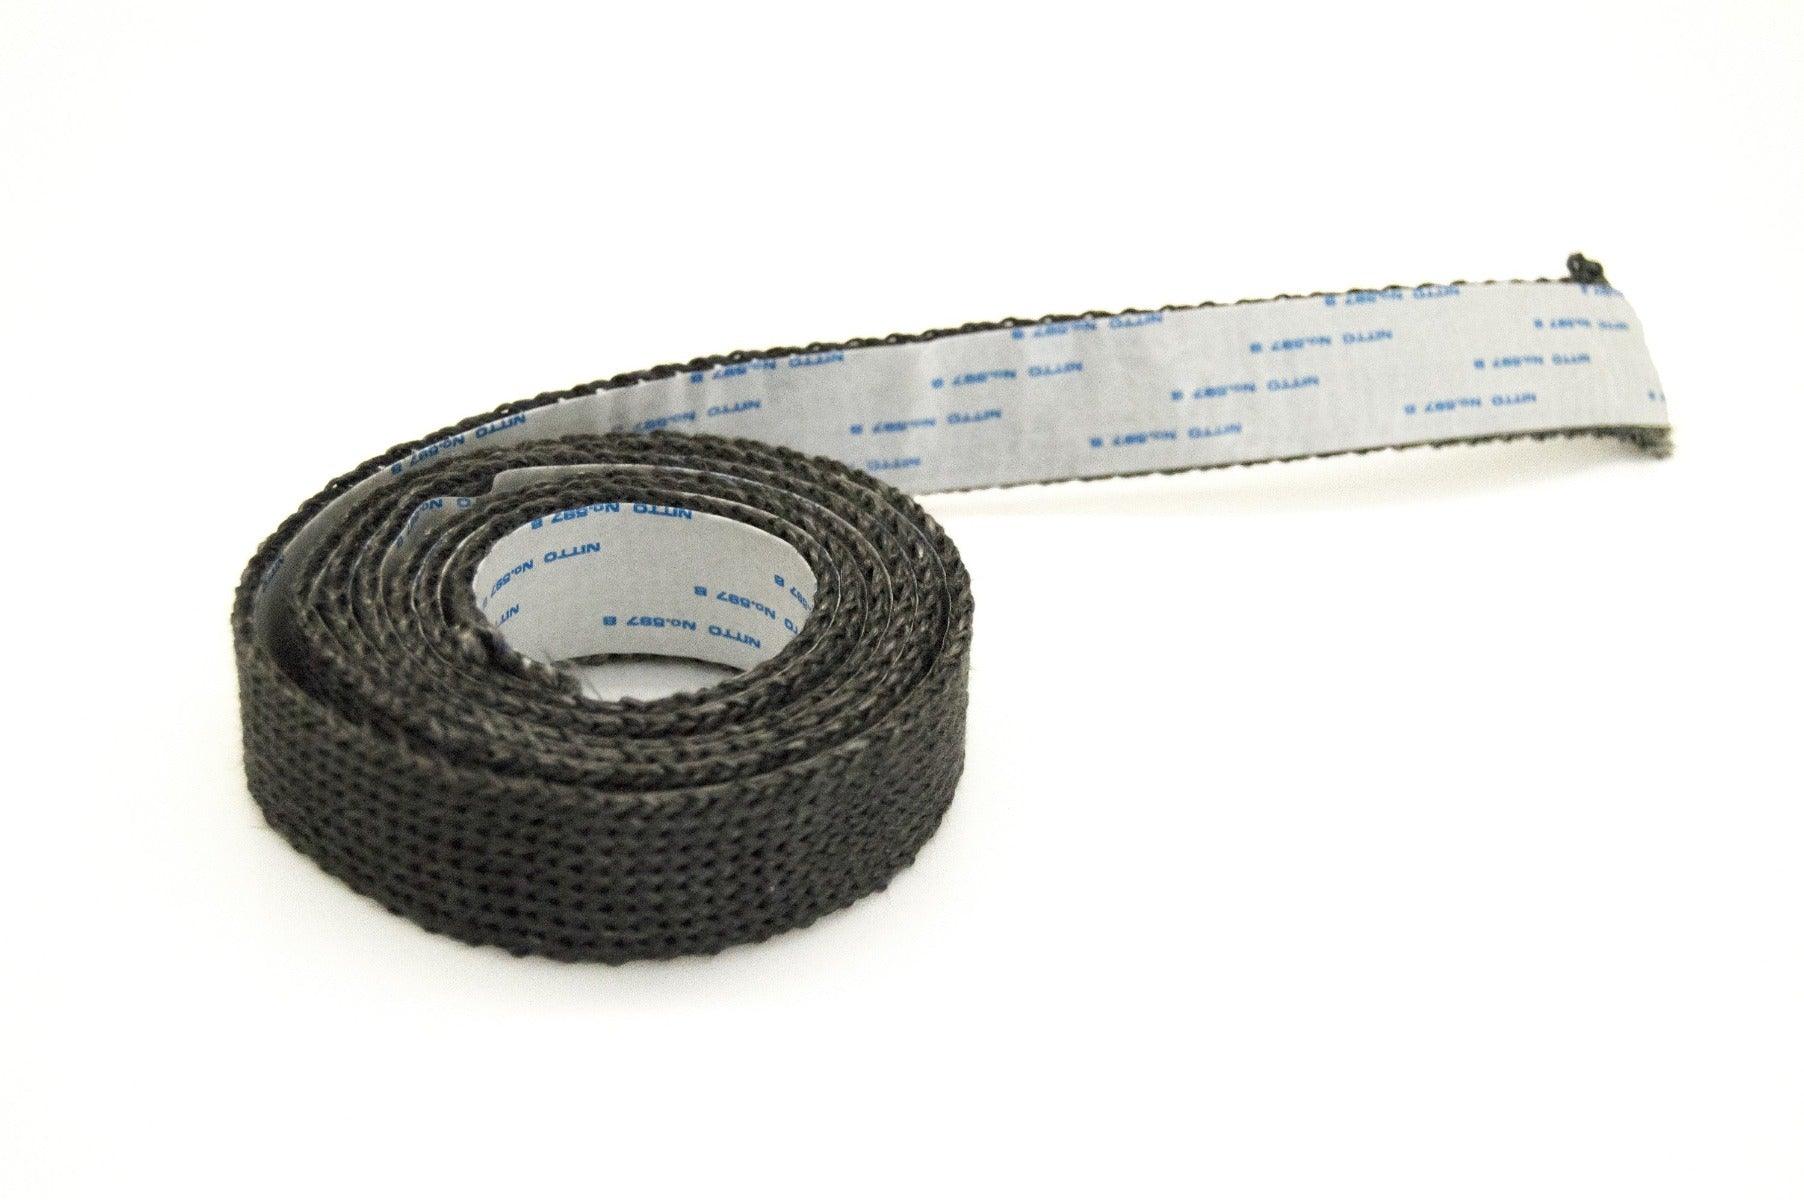 Tape Gasket - 100ft roll - Woodstove Fireplace Glass